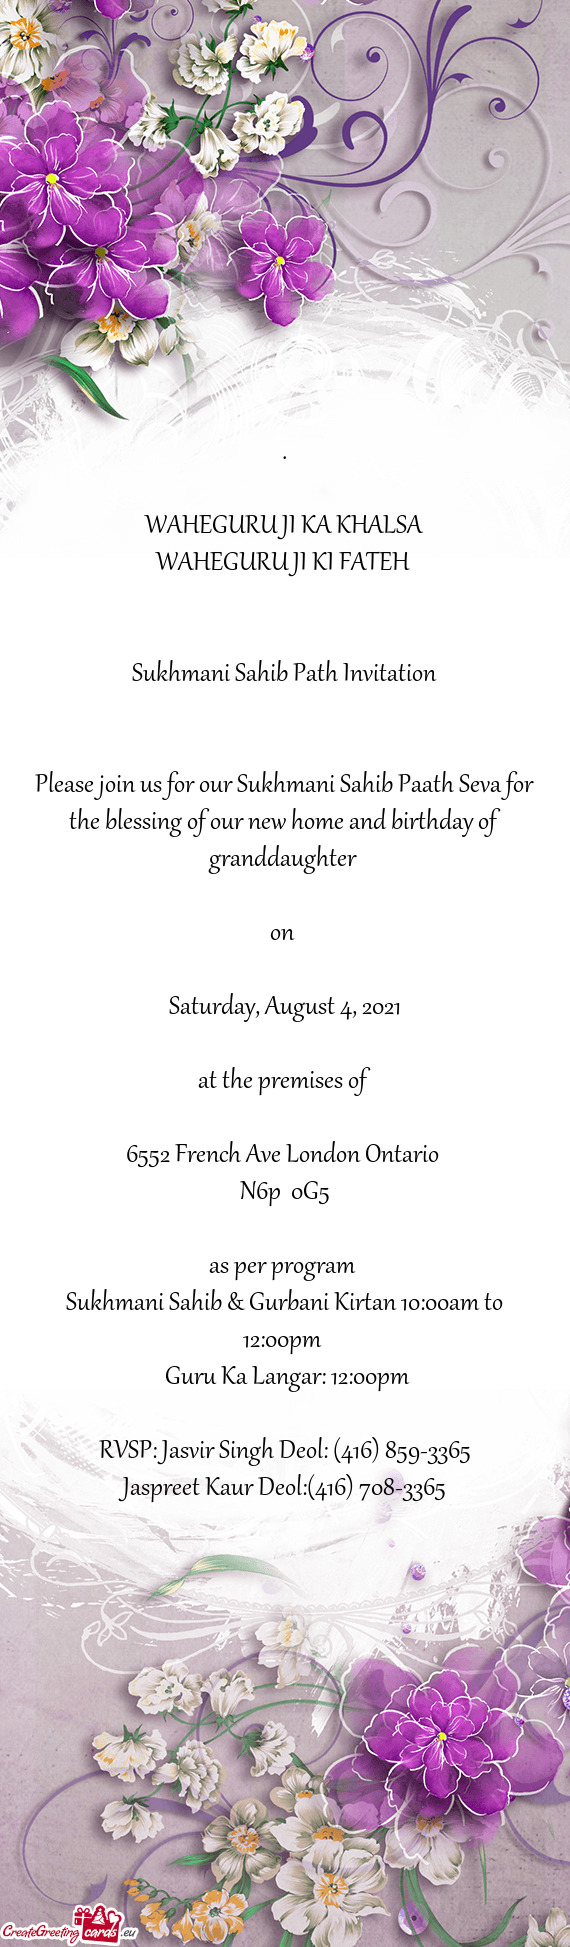 Please join us for our Sukhmani Sahib Paath Seva for the blessing of our new home and birthday of gr